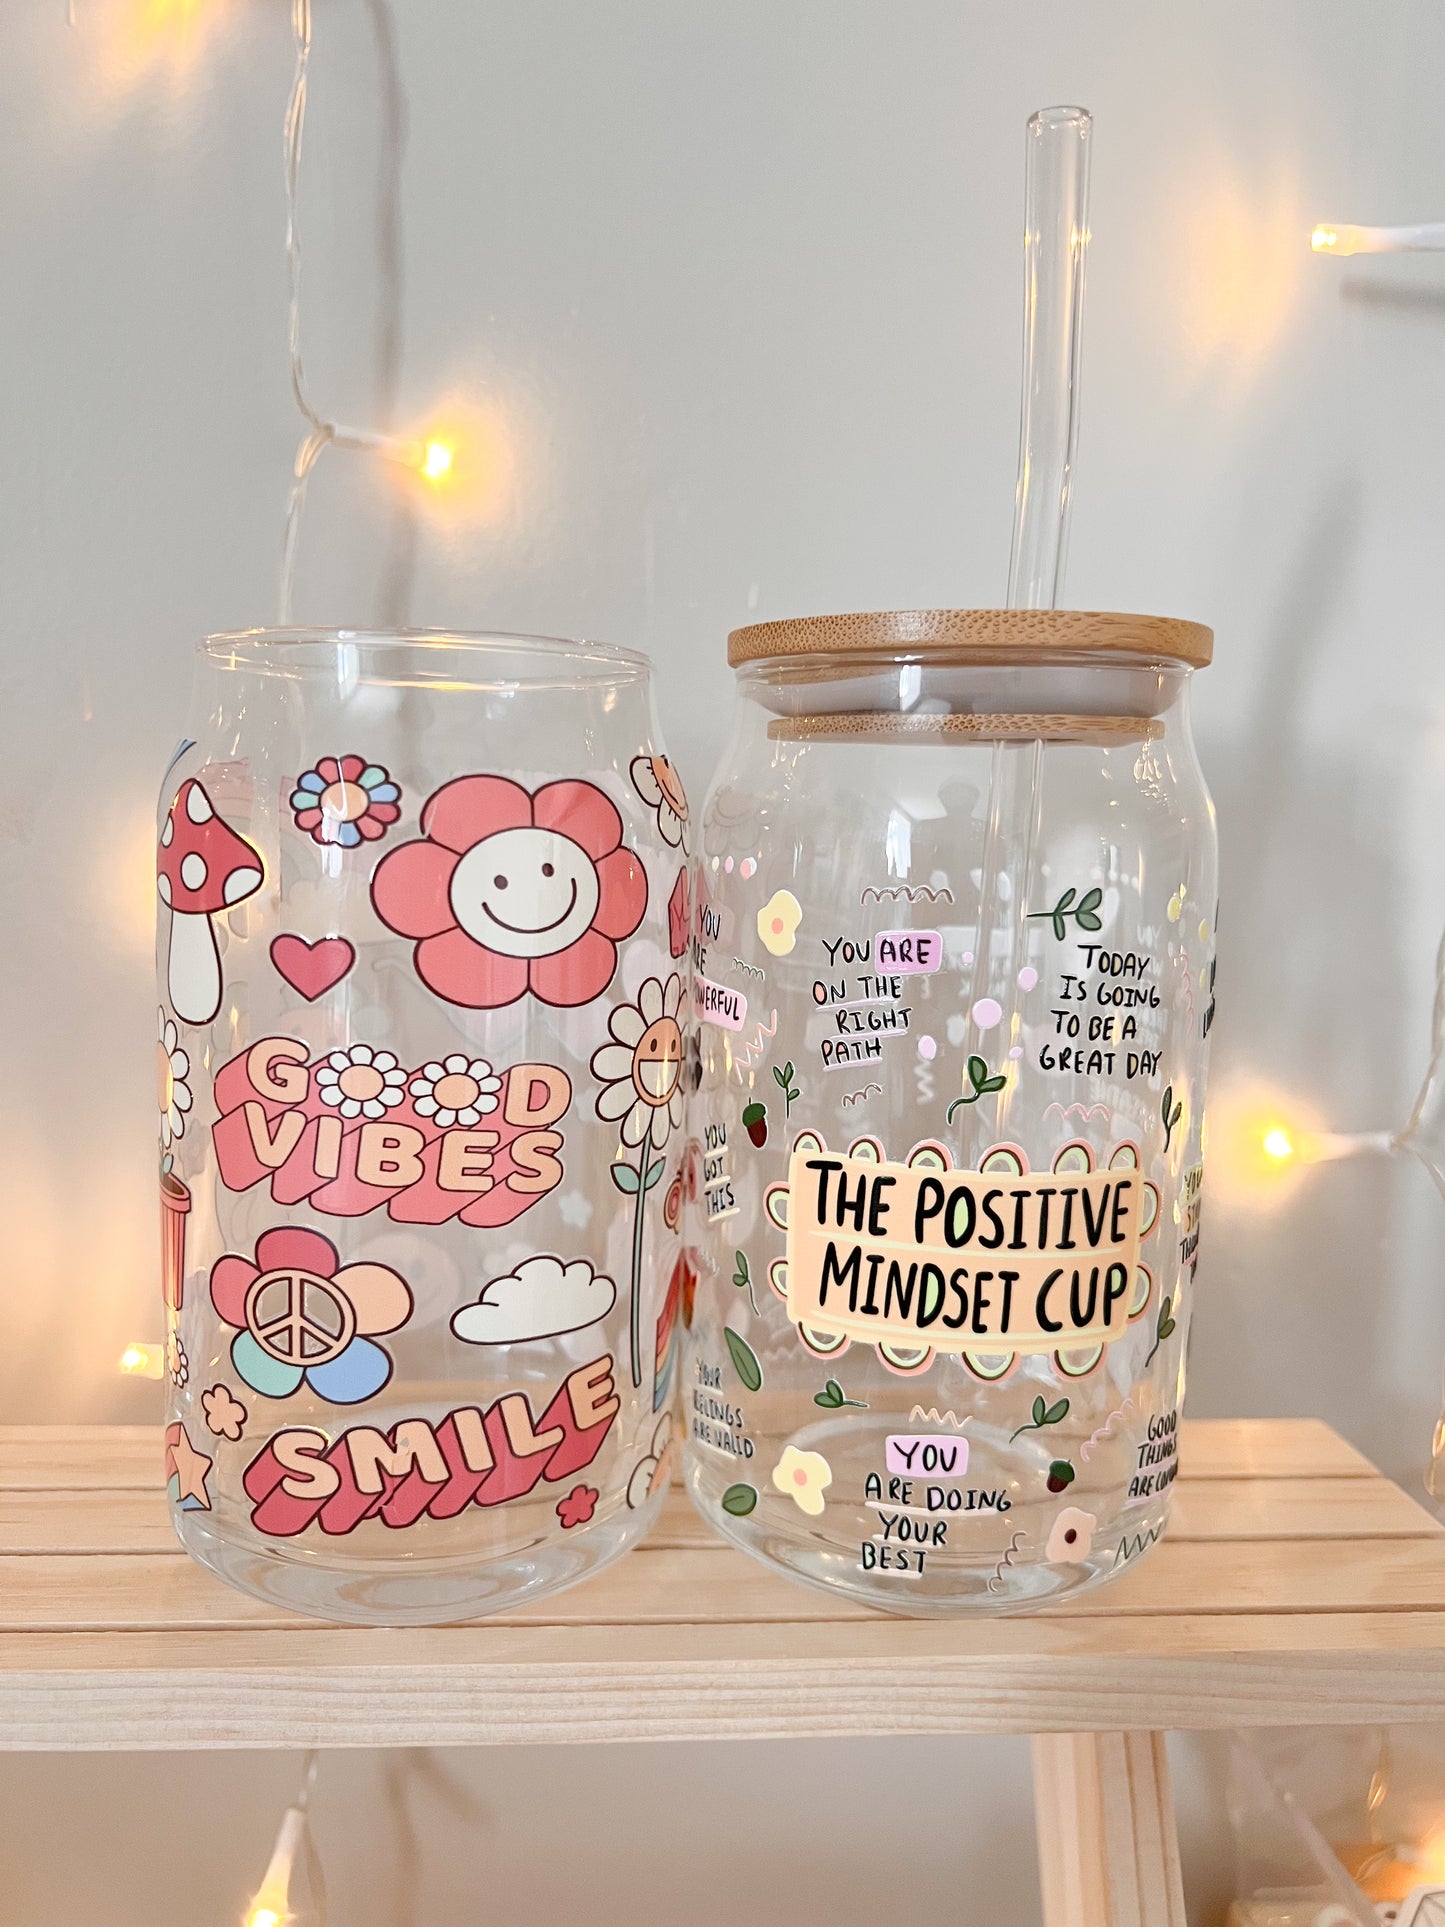 The Positive Mindset cup